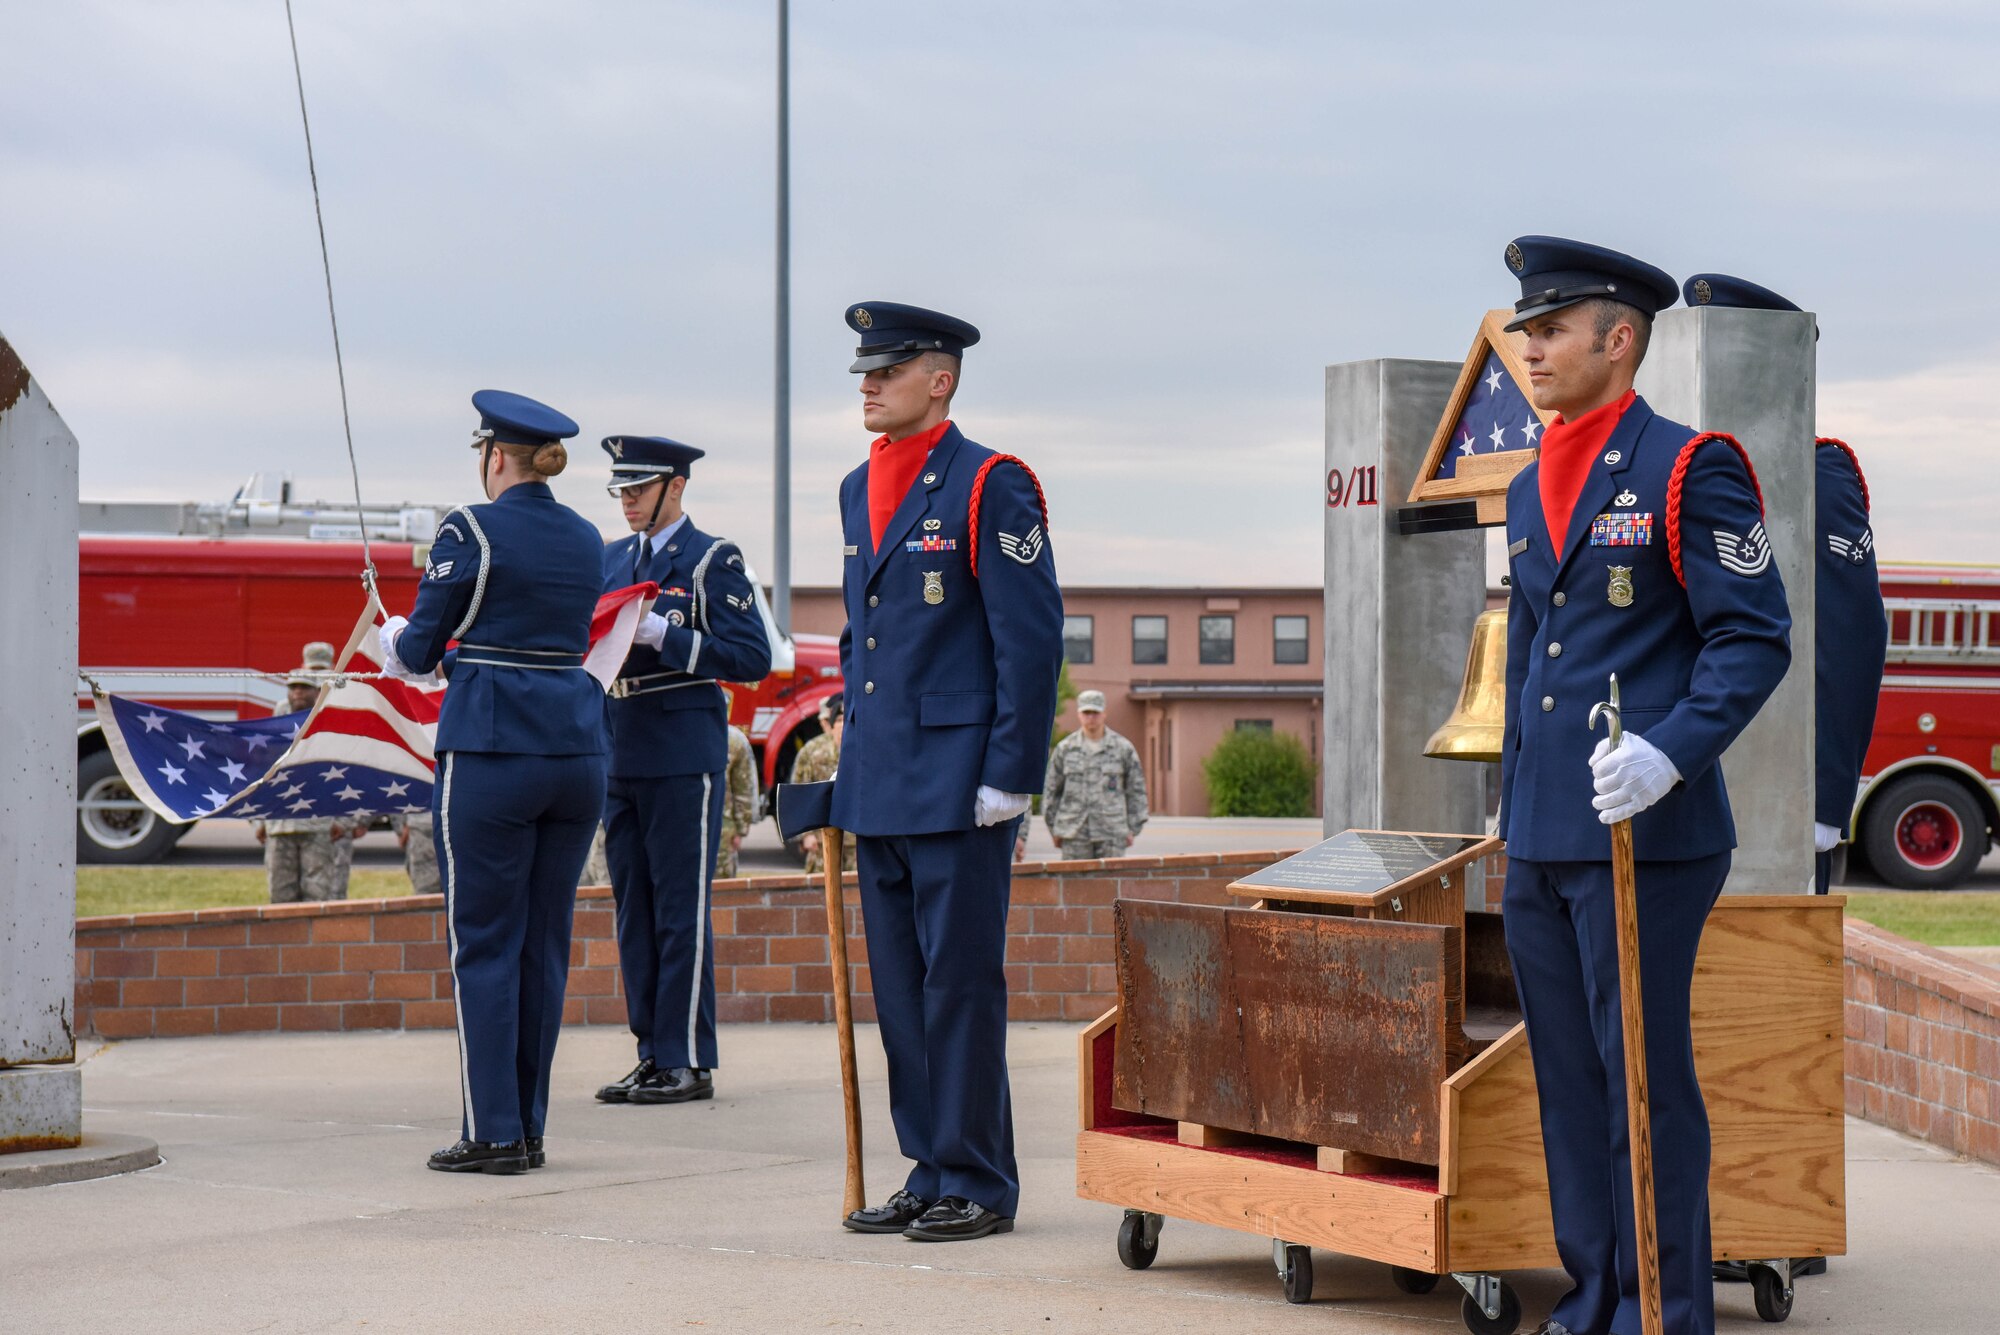 Members of the 28th Civil Engineer Squadron fire department rang the fire department bell at the 9/11 memorial ceremony outside of the 28th Bomb Wing headquarters at Ellsworth Air Force Base, S.D., Sept. 11, 2018. The bell was struck in three intervals of five rings, as firefighter tradition, in honor of the 343 firefighters that died on Sept. 11, 2001. (U.S. Air Force photo by Airman Christina Bennett)